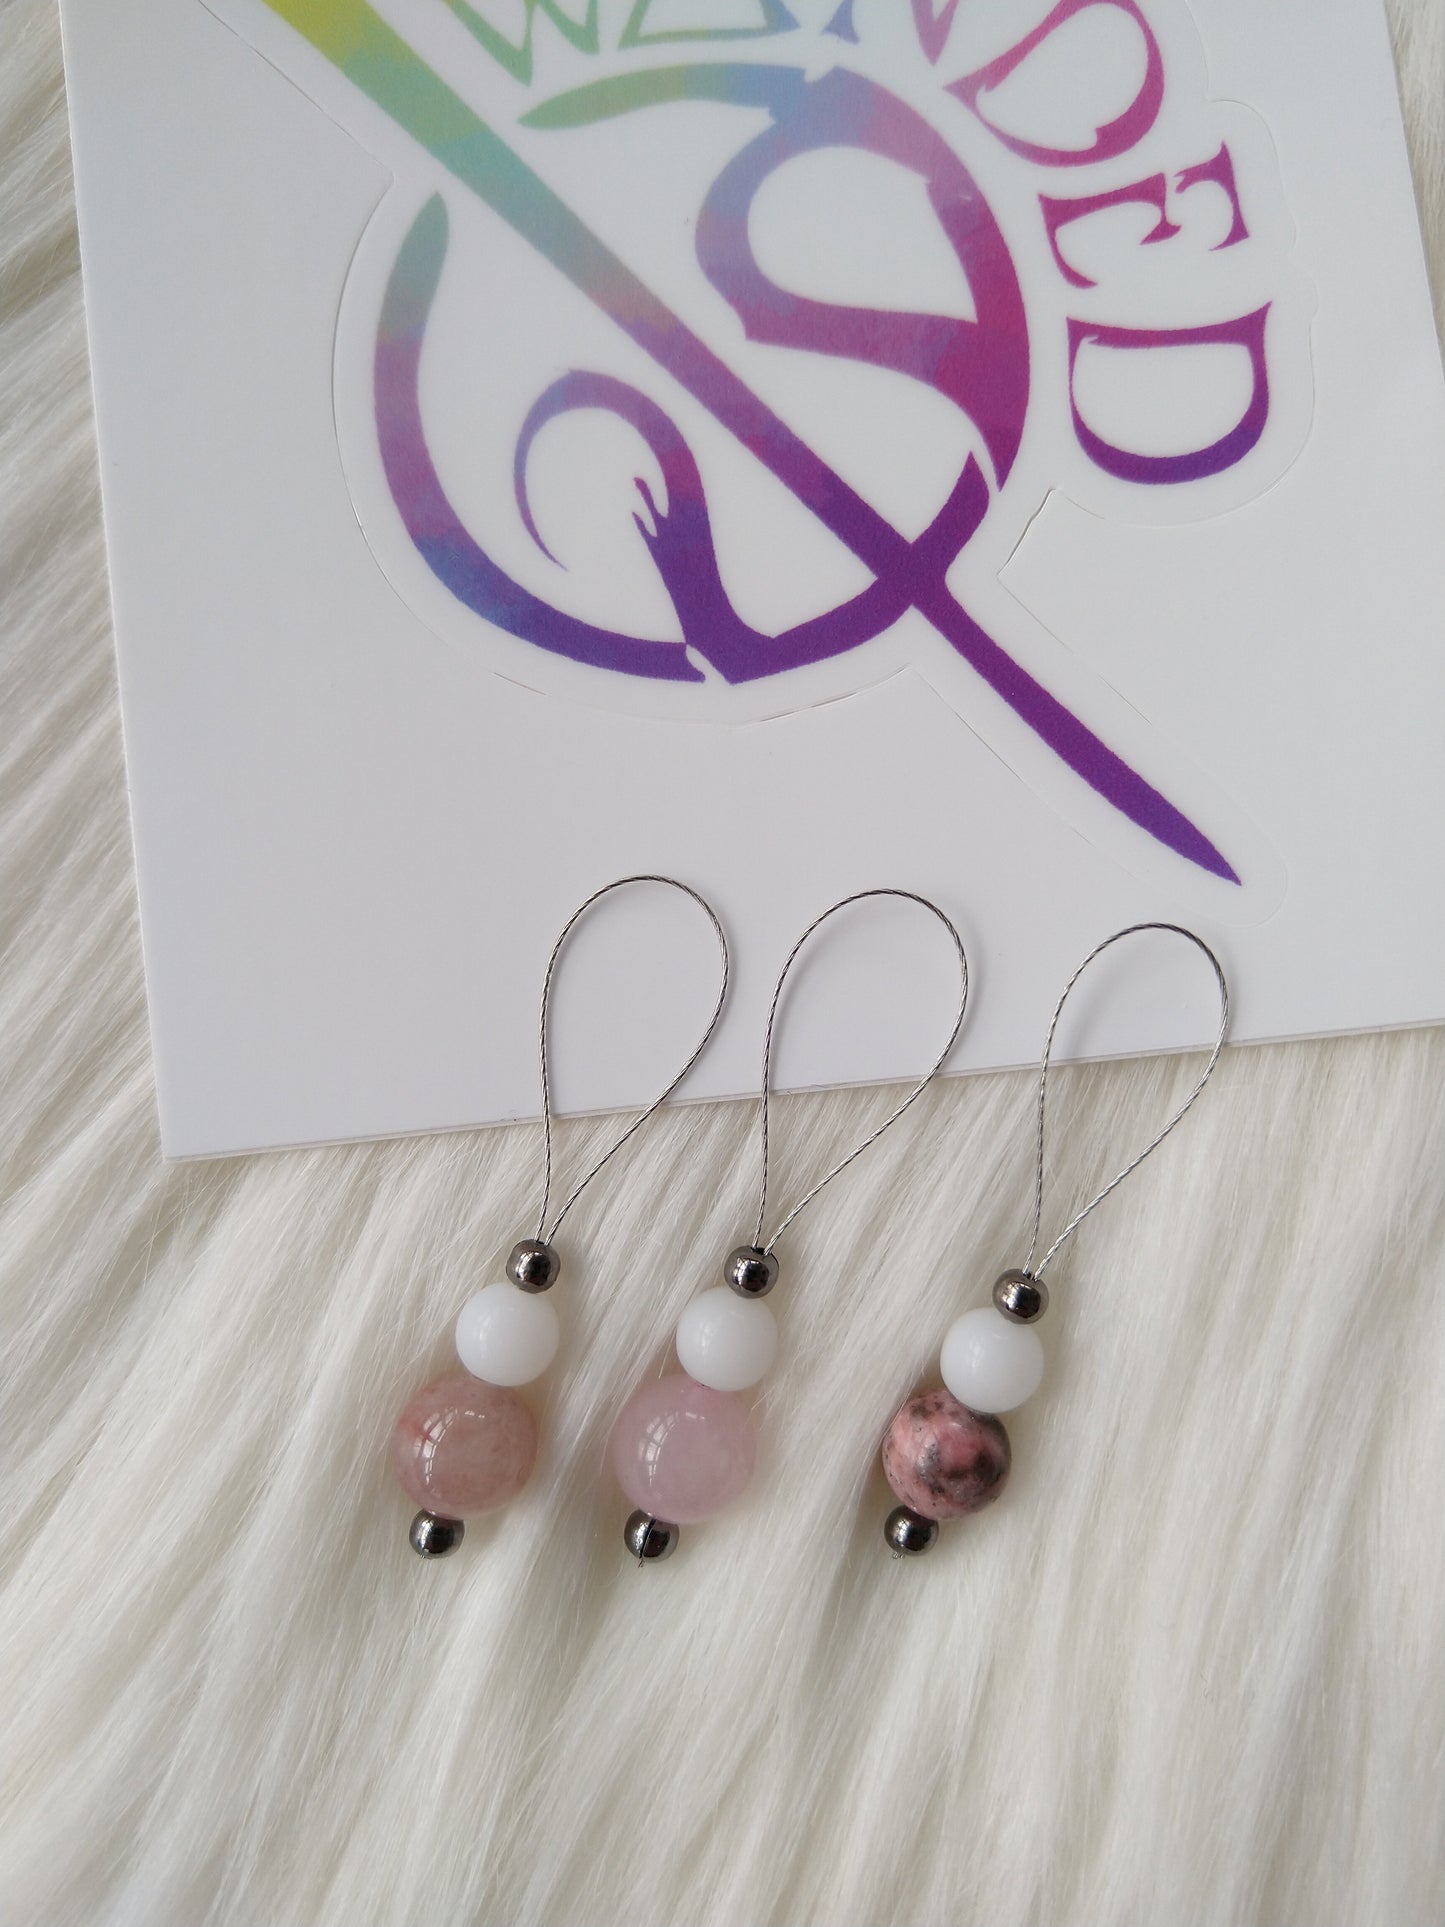 Stitch Markers - pink stones, set of 3 (mixed)